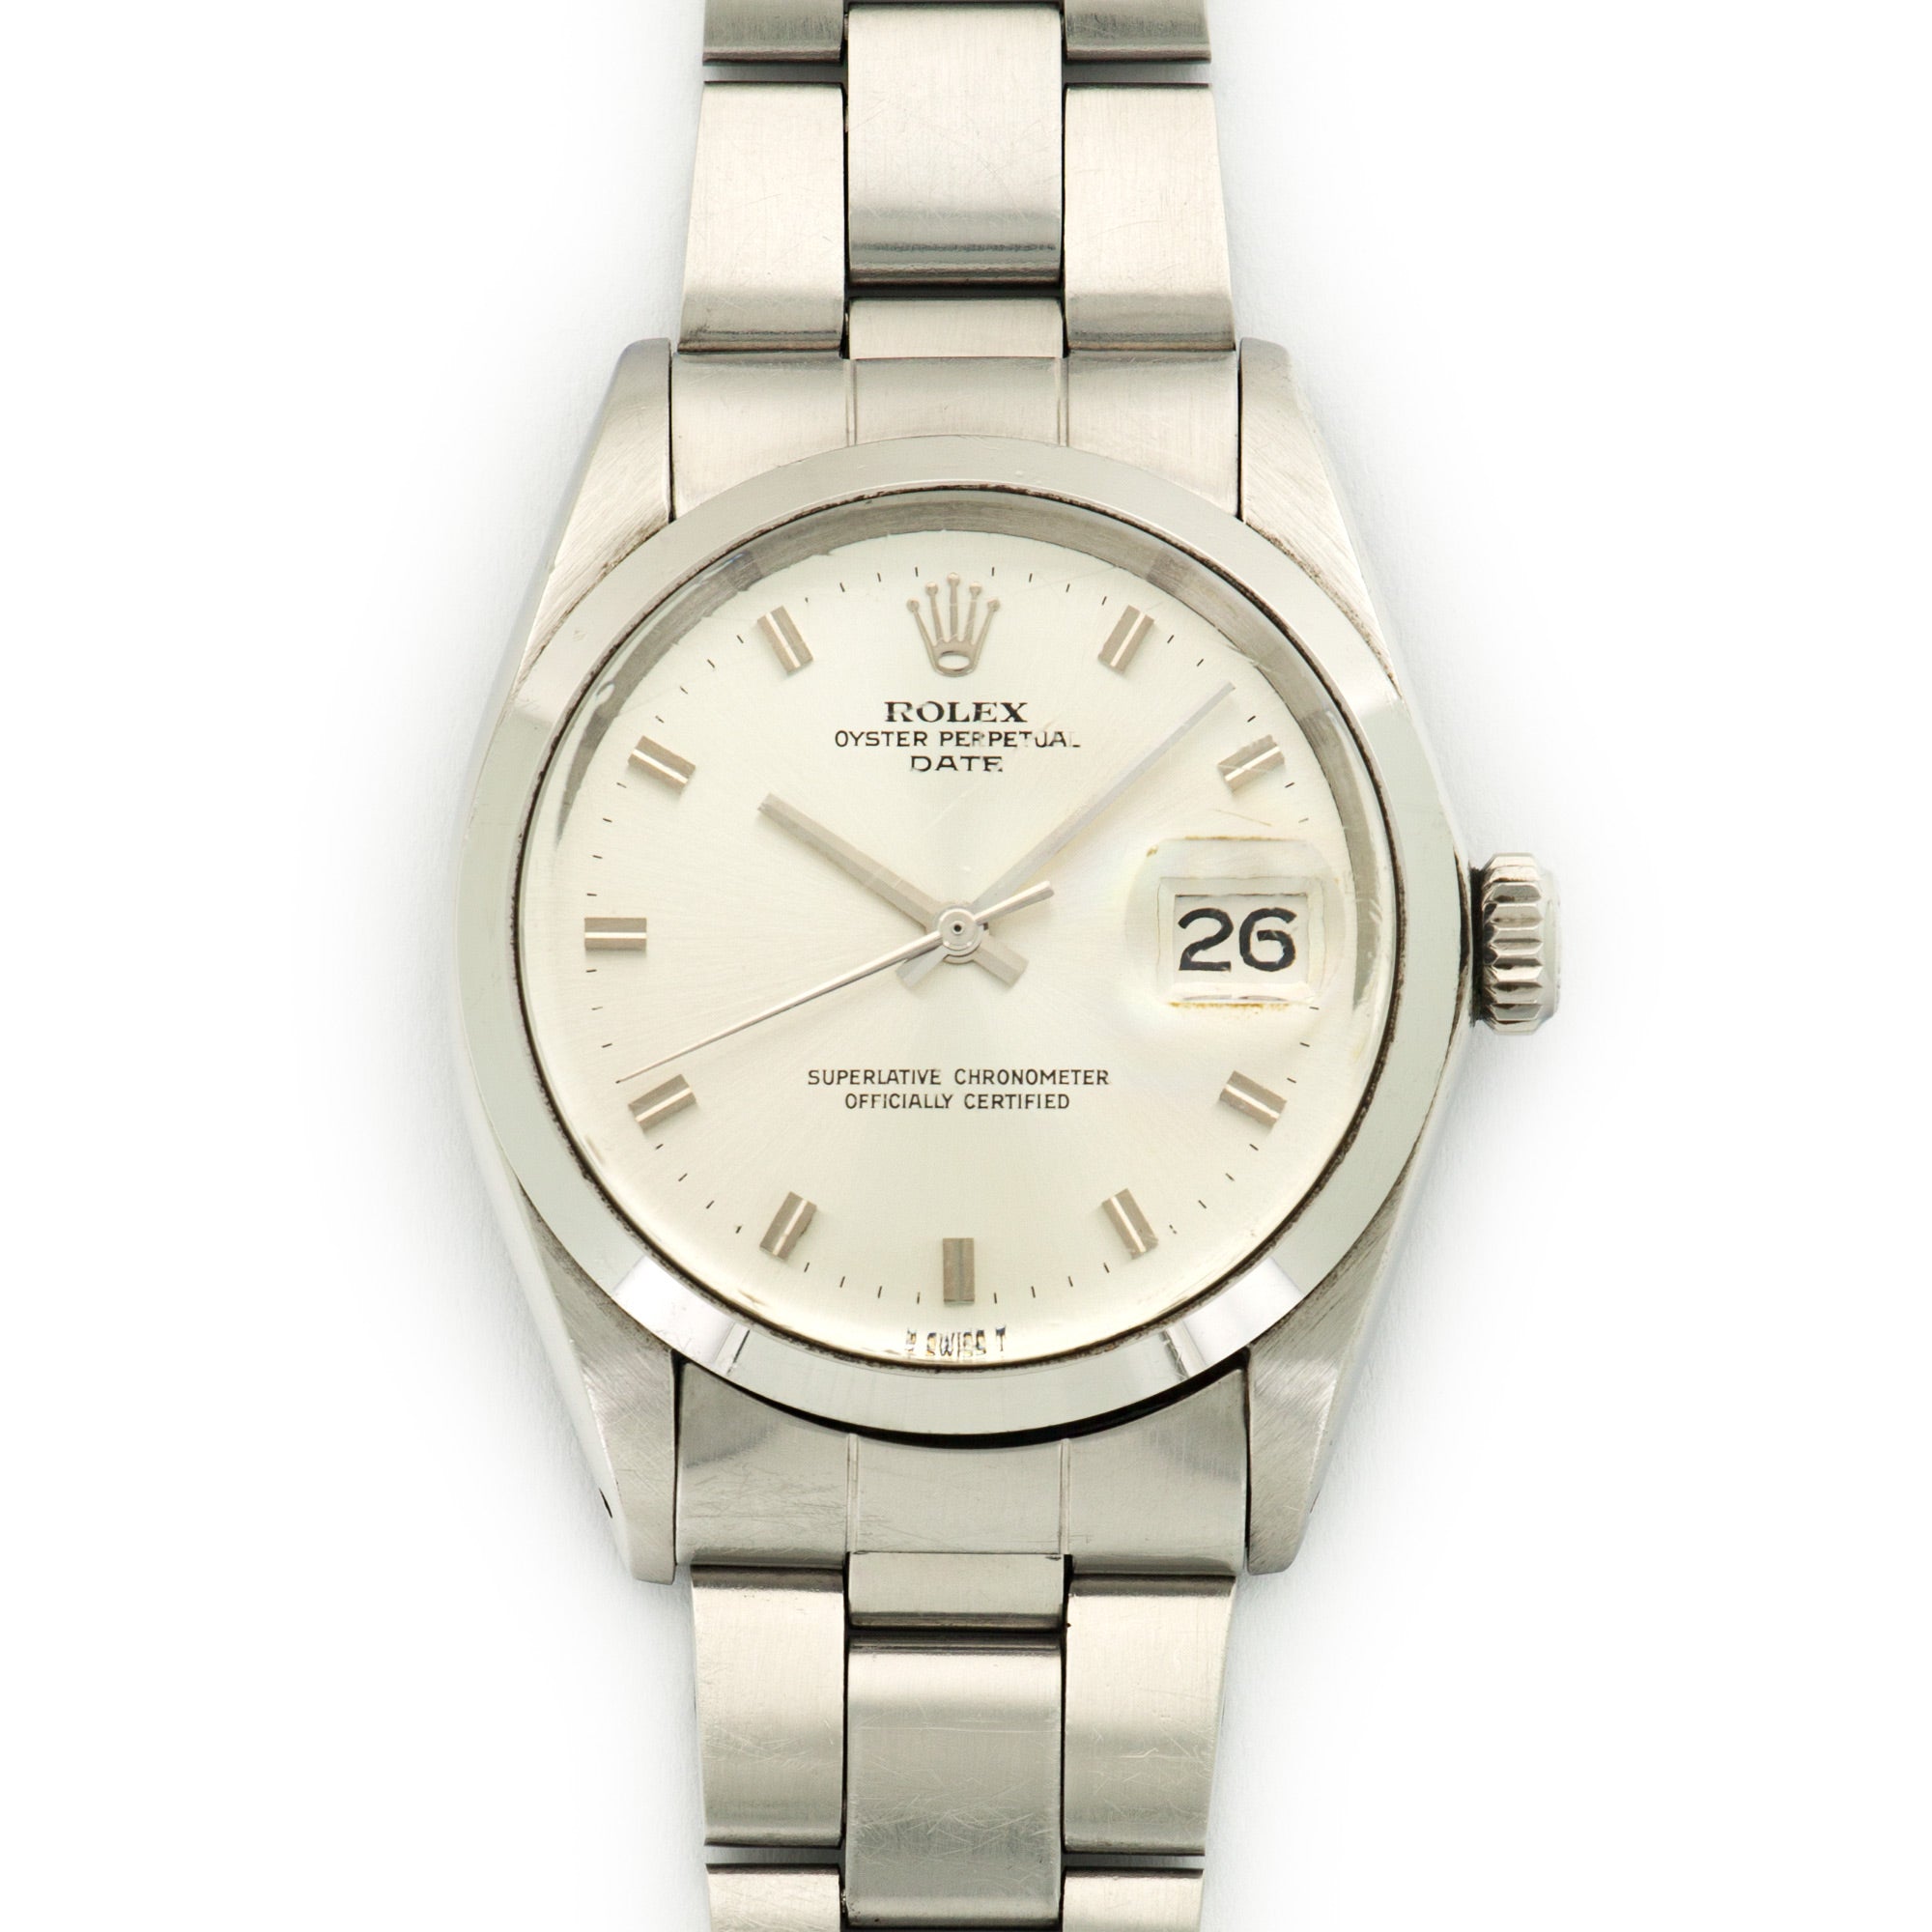 Rolex - Rolex Stainless Steel Date Ref. 1500 with Original Papers - The Keystone Watches